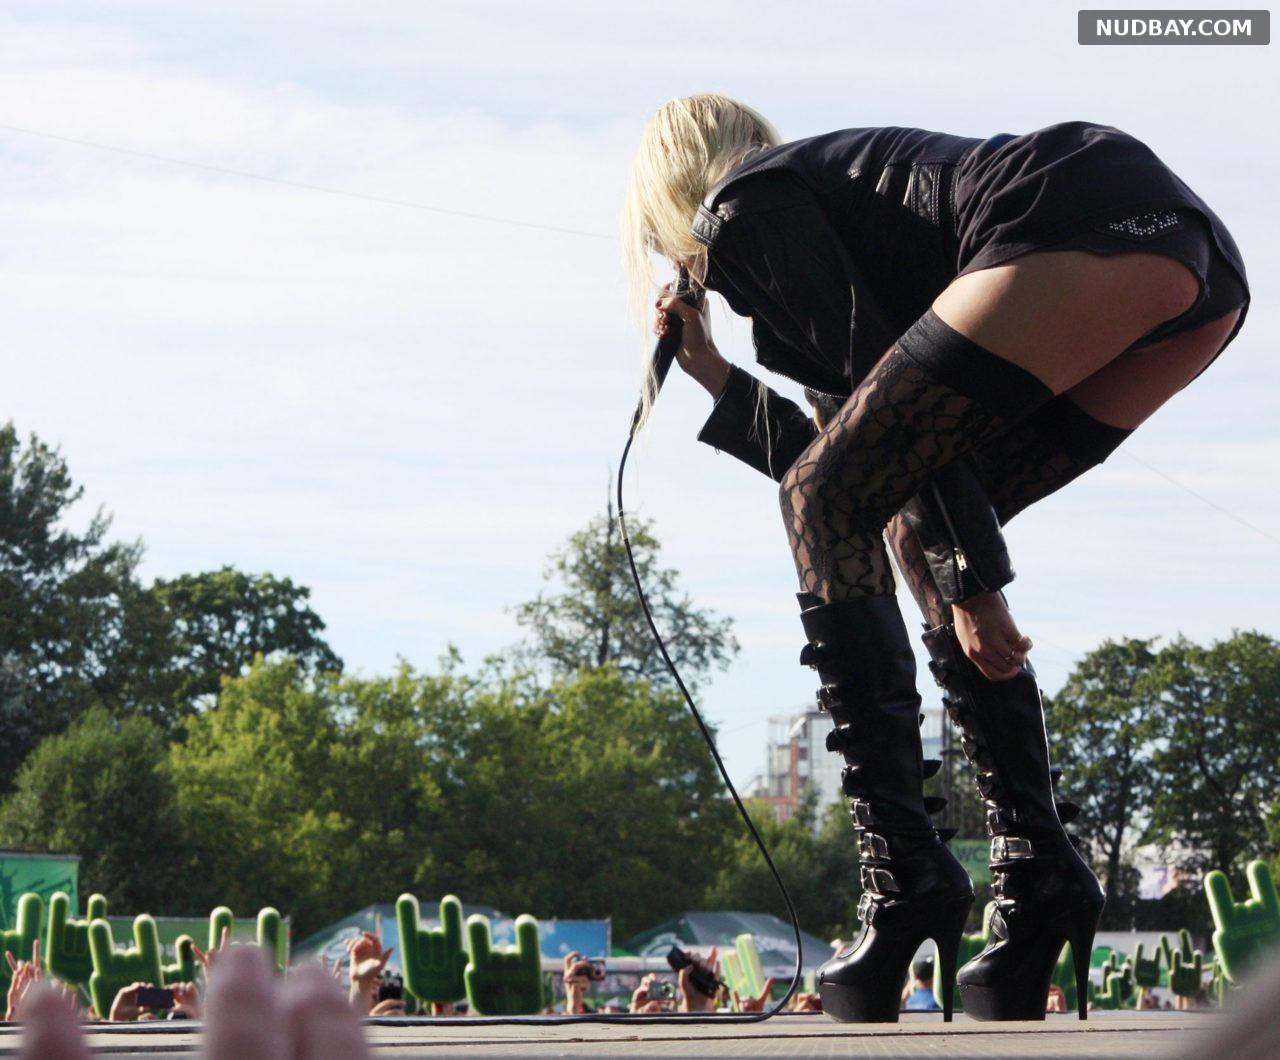 Taylor Momsen Ass Performs on stage in Saint Petersburg Jul 13 2011